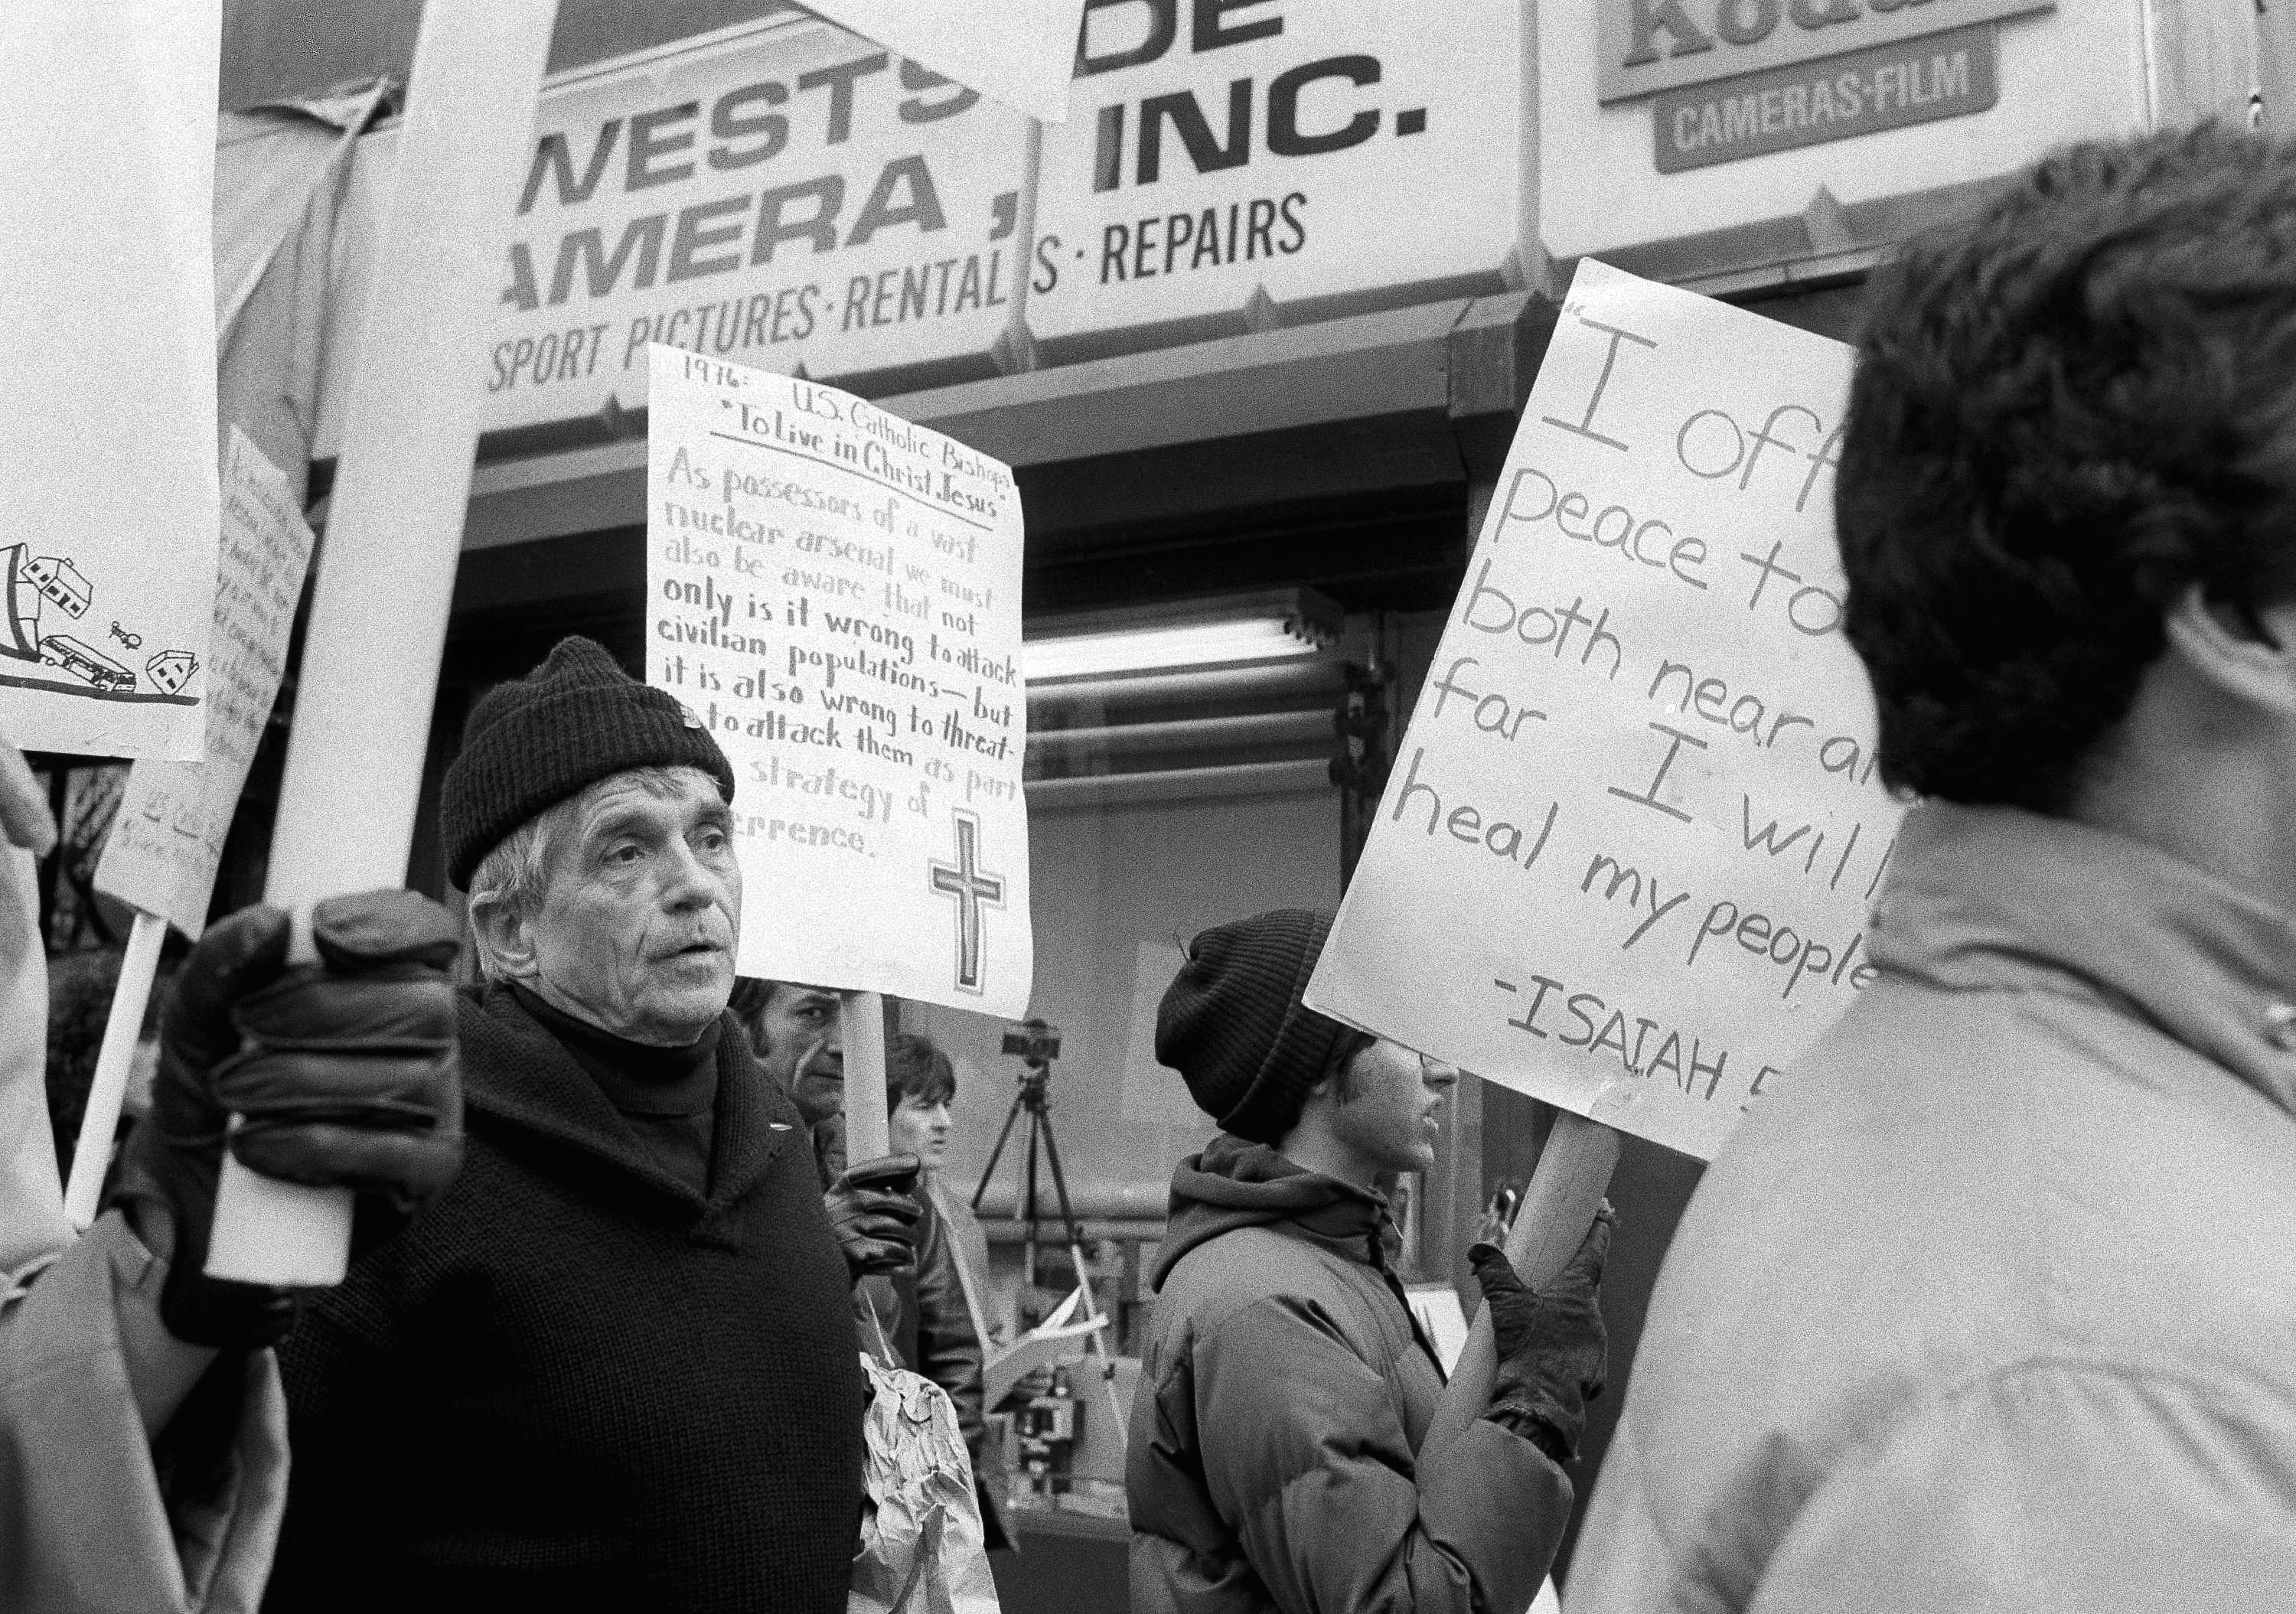 File-This April 9, 1982, file photo shows Daniel Berrigan marching with about 40 others outside of the Riverside Research Center in New York. The Roman Catholic priest and Vietnam war protester, Berrigan has died. He was 94. Michael Benigno, a spokesman for the Jesuits USA Northeast Province, says Berrigan died Saturday, April 30, 2016, at a Jesuit infirmary at Fordham University.  (AP Photo/Marty Lederhandler, File)